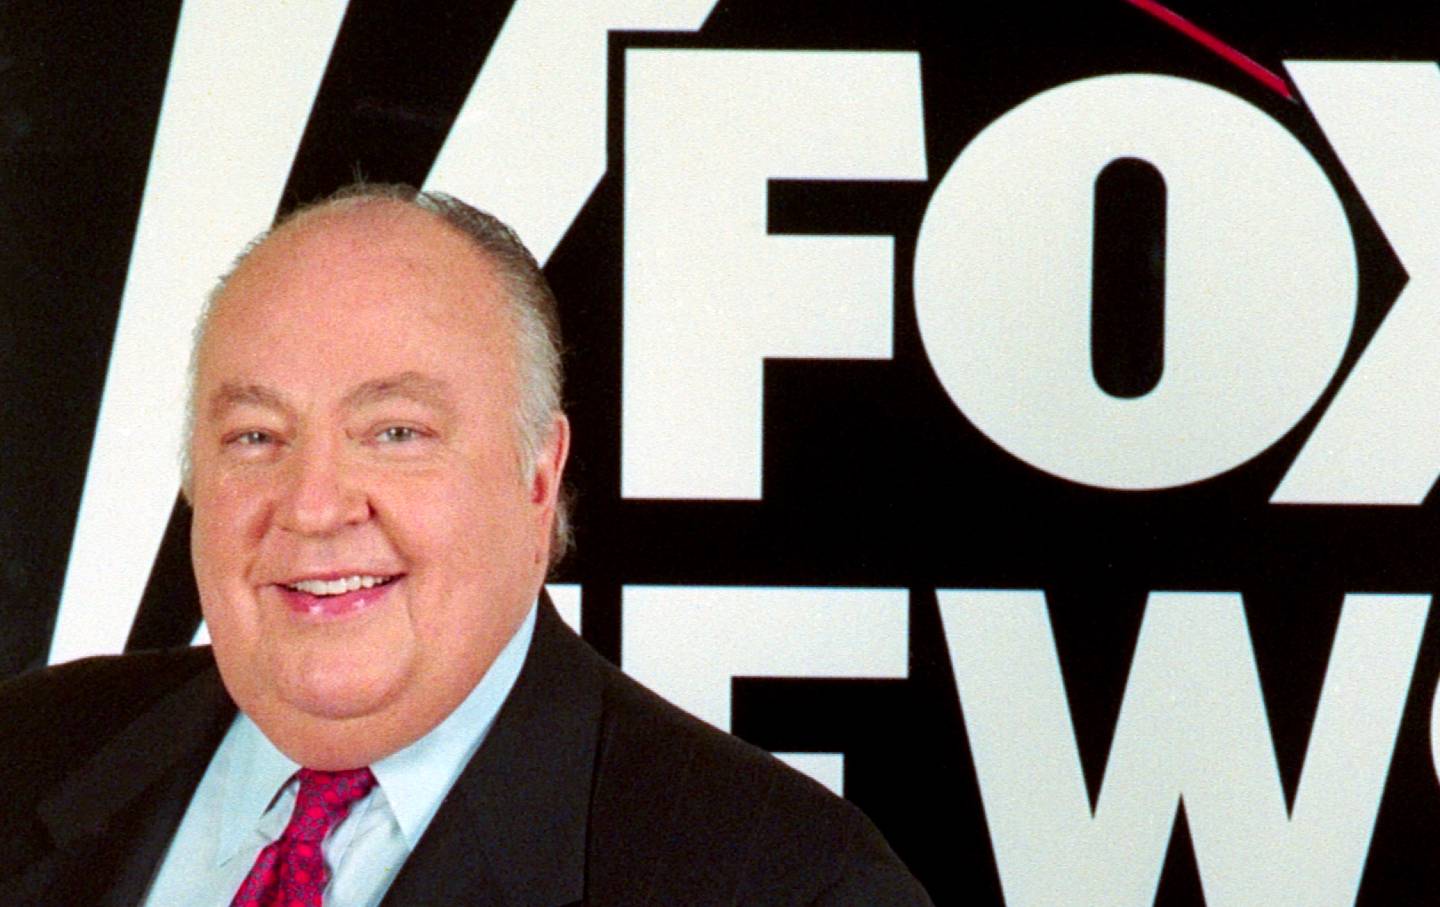 Television executive and Chairman of Fox News Roger Ailes in front of logo of recently launched Fox News Channel at Television Critics Association press event, January 14, 1997.